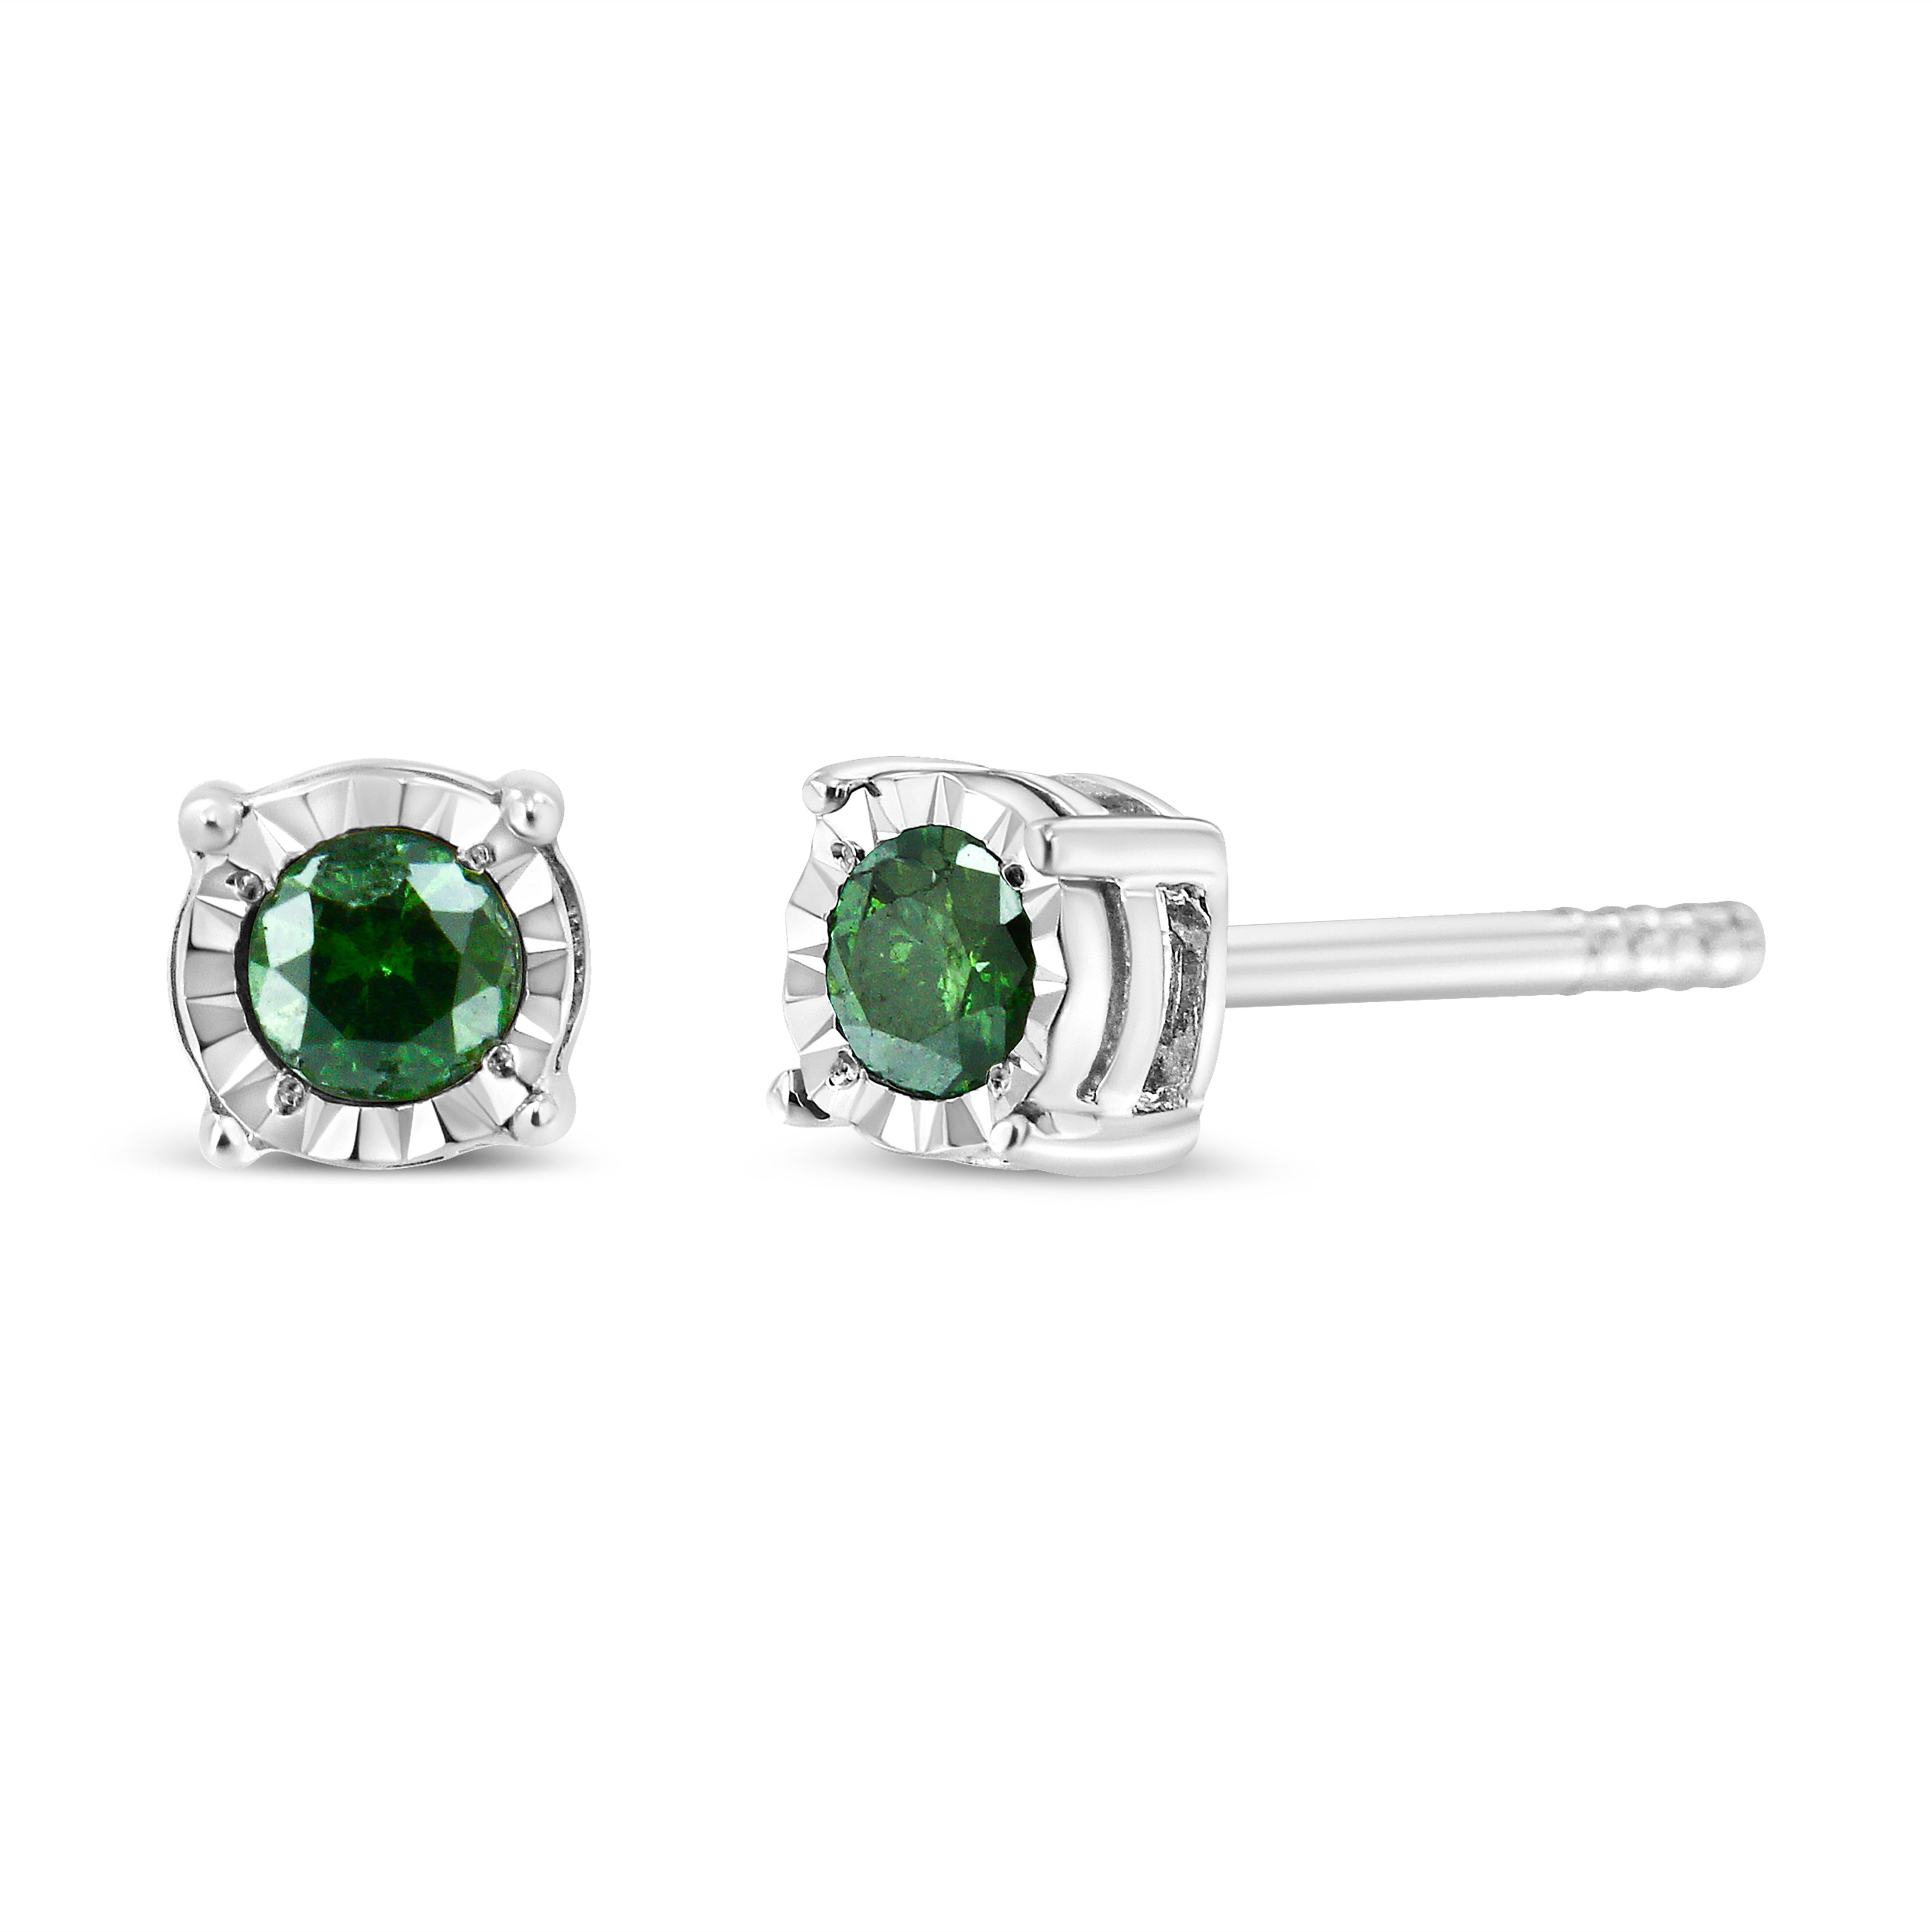 Add some glam to your everyday look with these dazzling stud earrings. Fashioned in a round shape, the earrings are composed of alluring sterling silver. Finished off with astonishing brilliance, the pair of earrings are articulated with treated